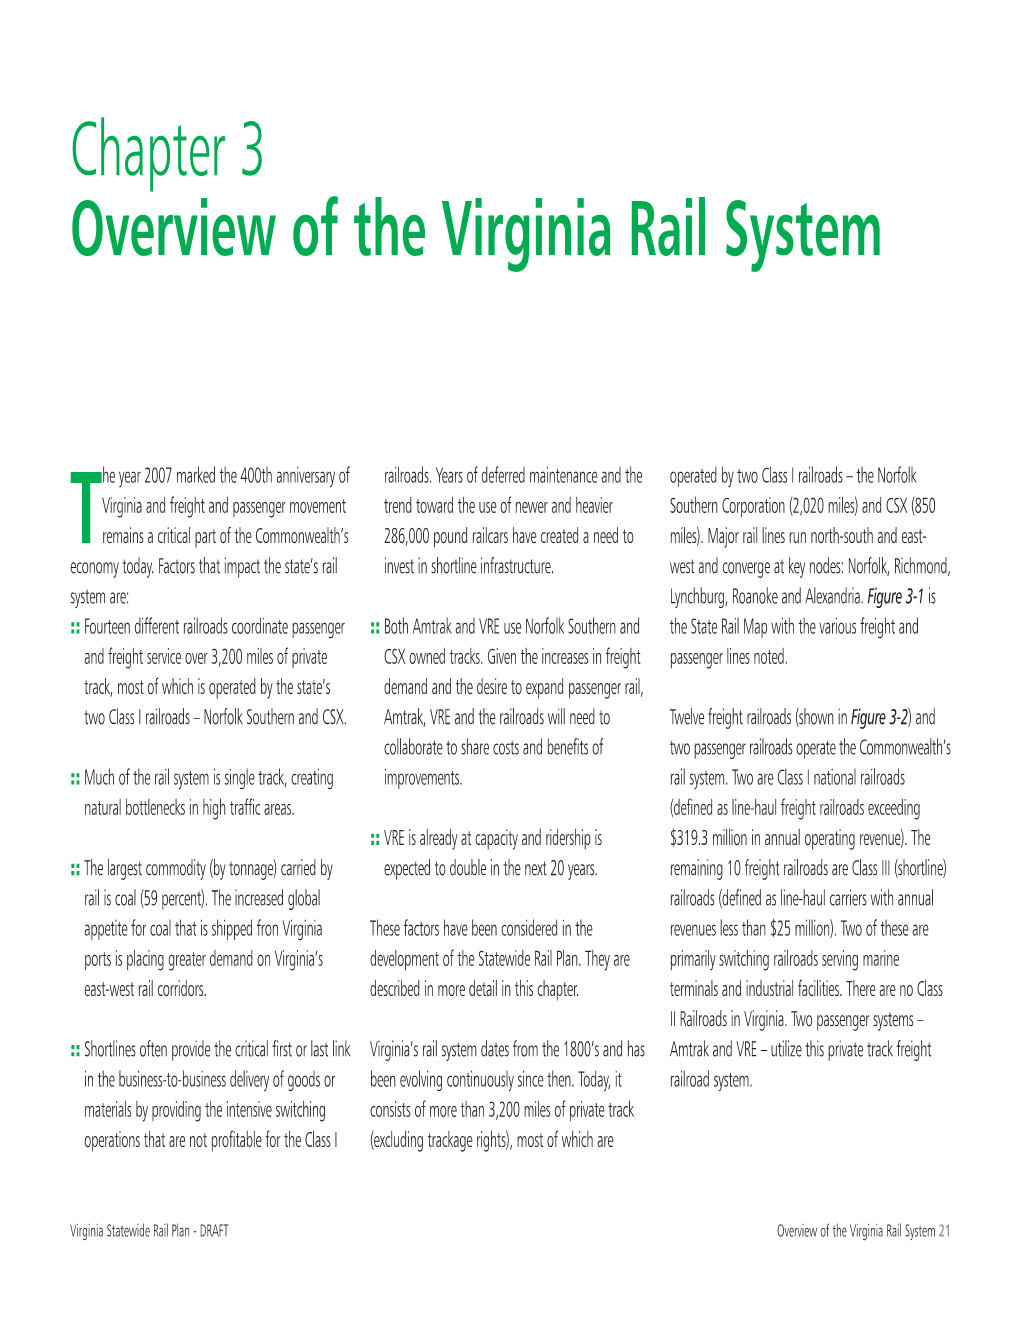 Chapter 3 Overview of the Virginia Rail System